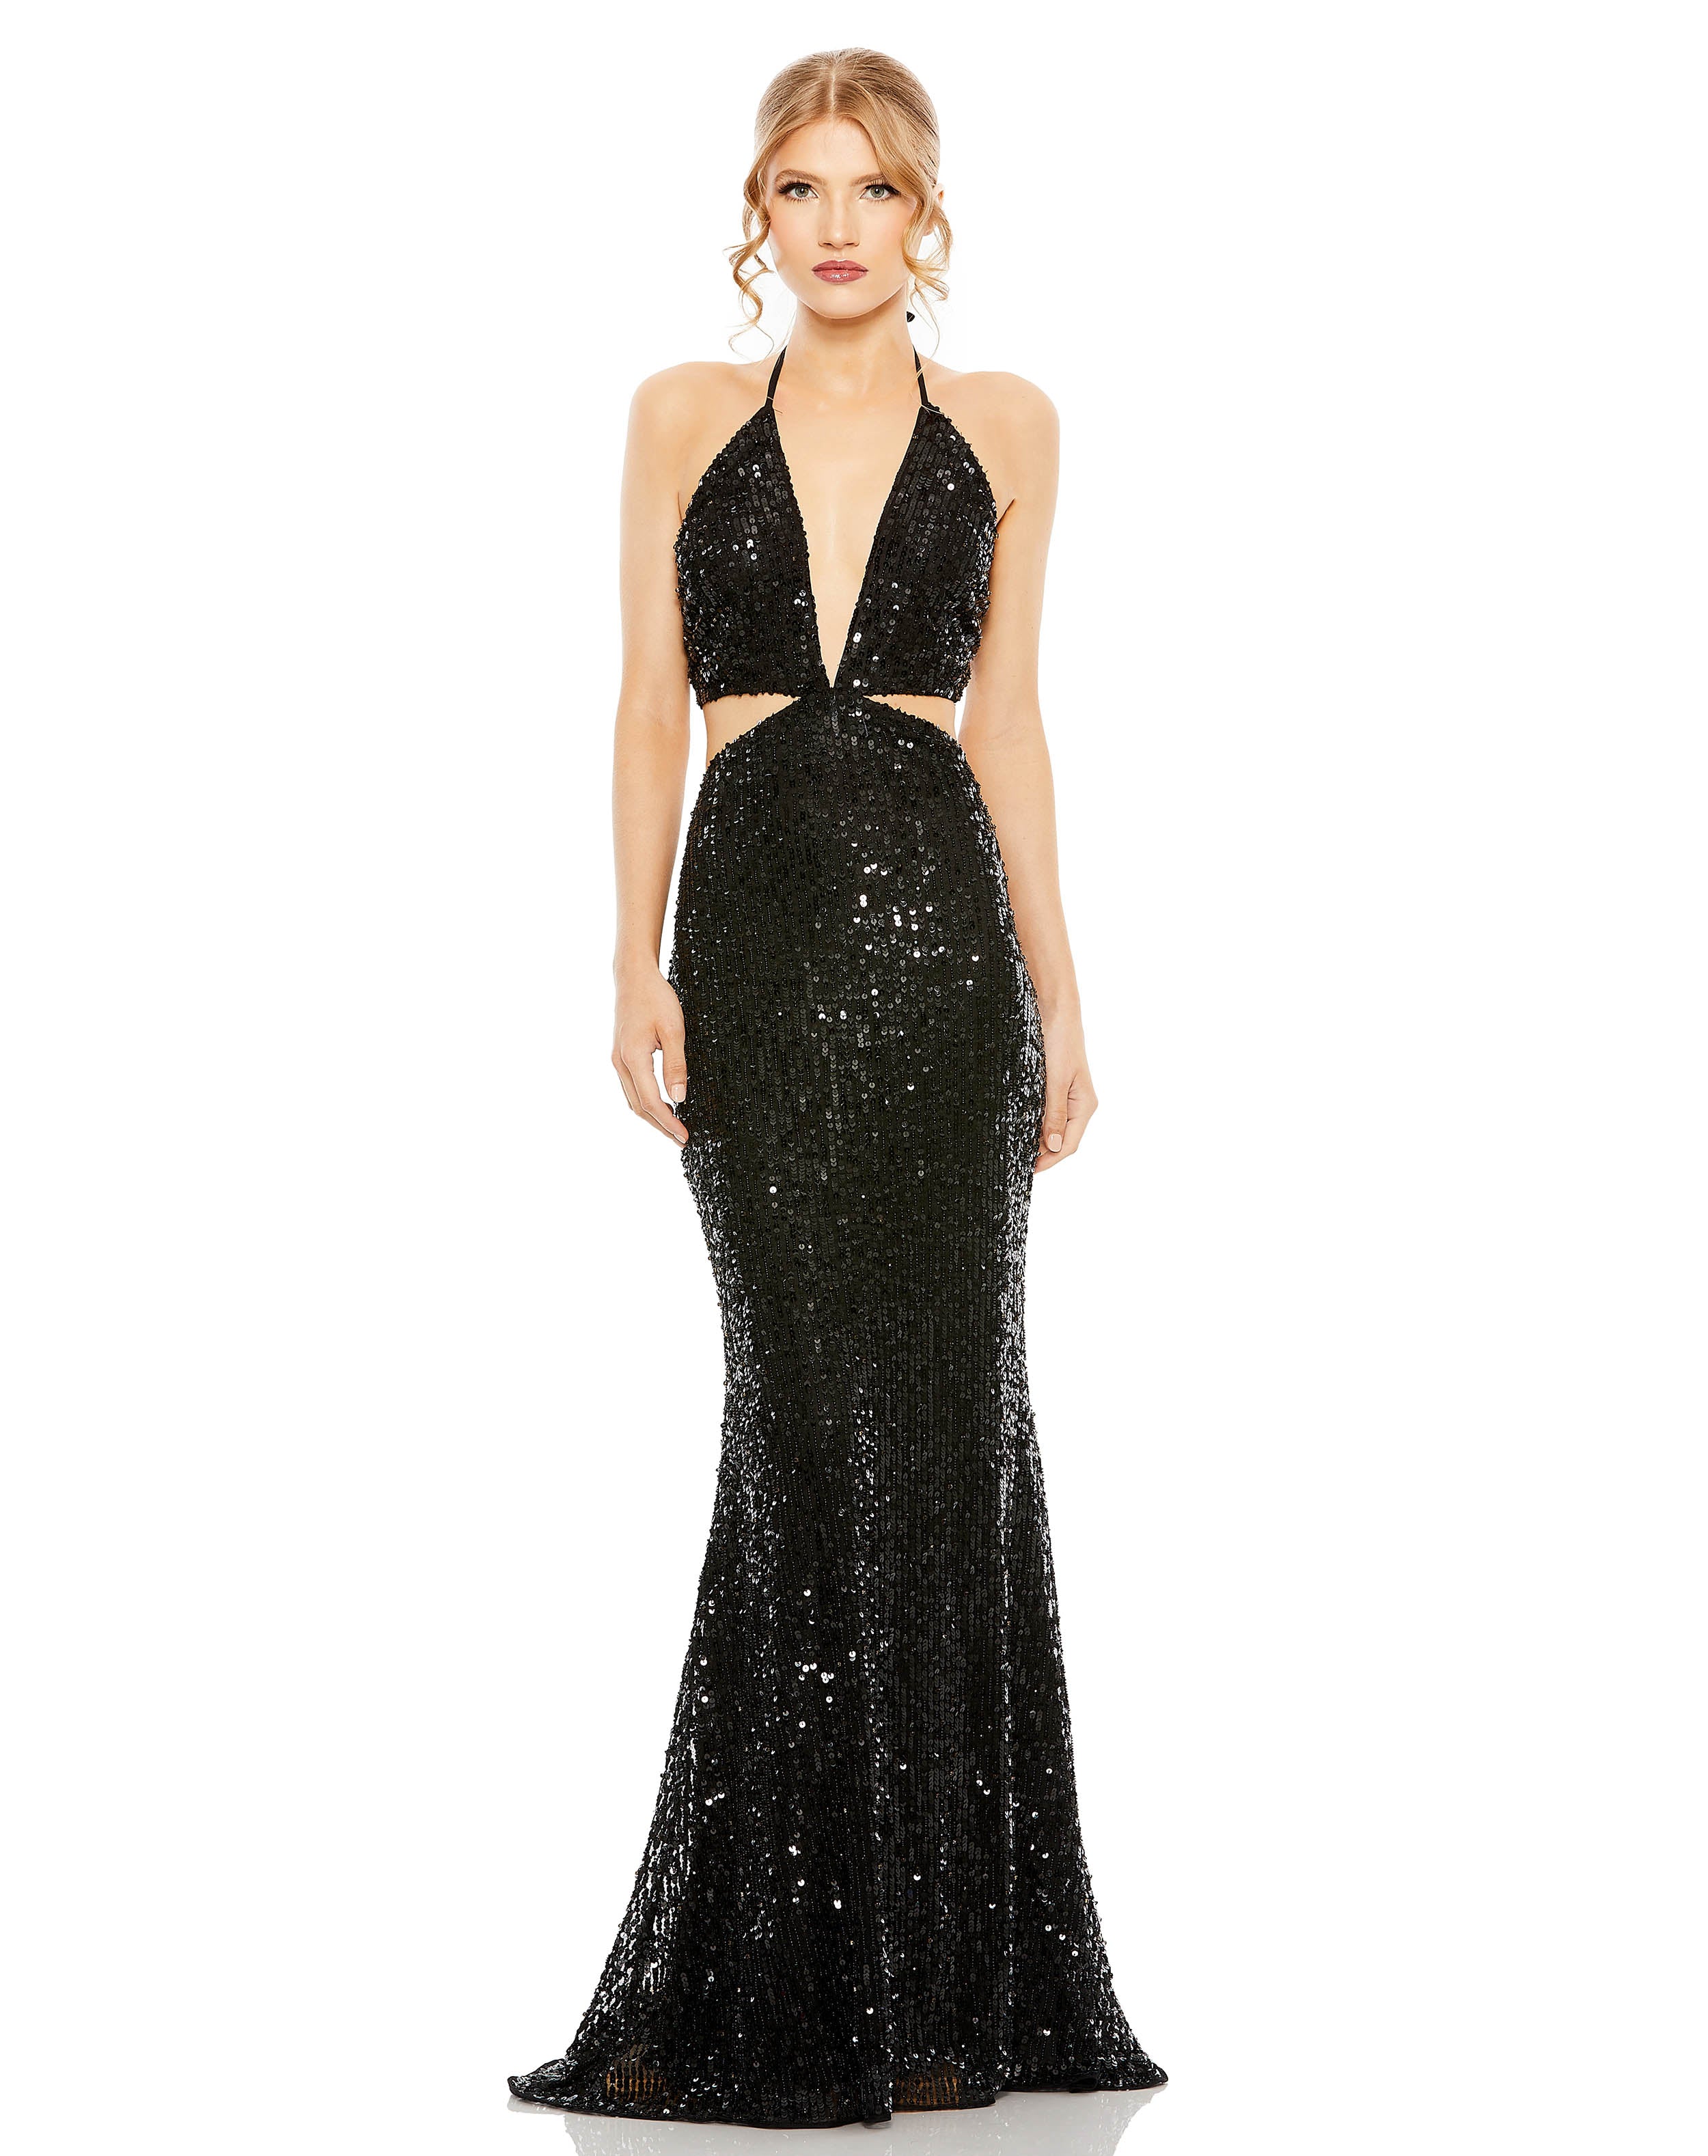 Cut Out Halter Tie Back Sequin Gown